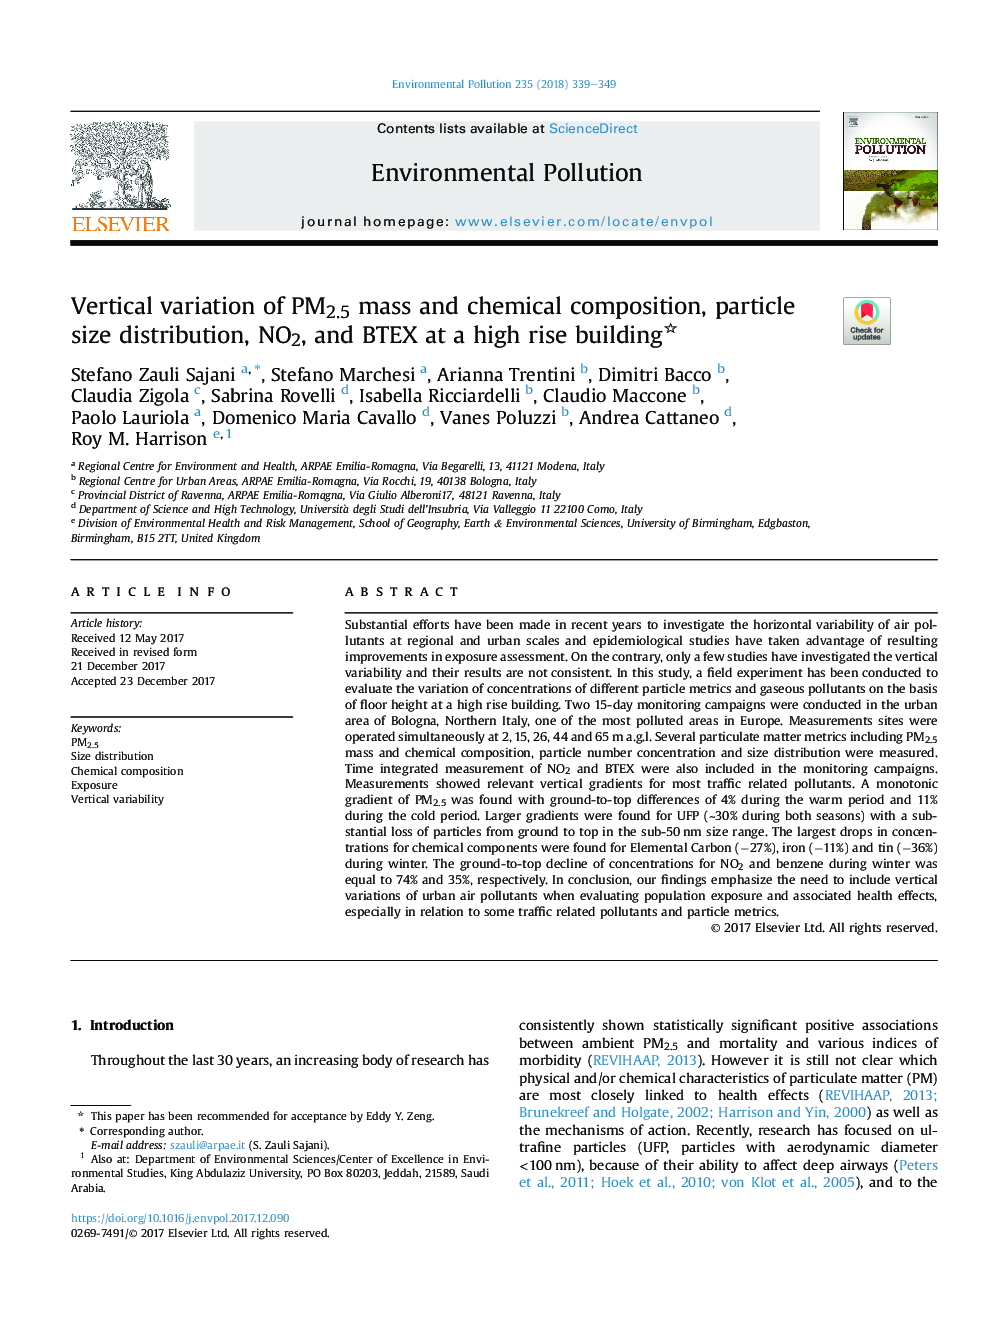 Vertical variation of PM2.5 mass and chemical composition, particle size distribution, NO2, and BTEX at a high rise building